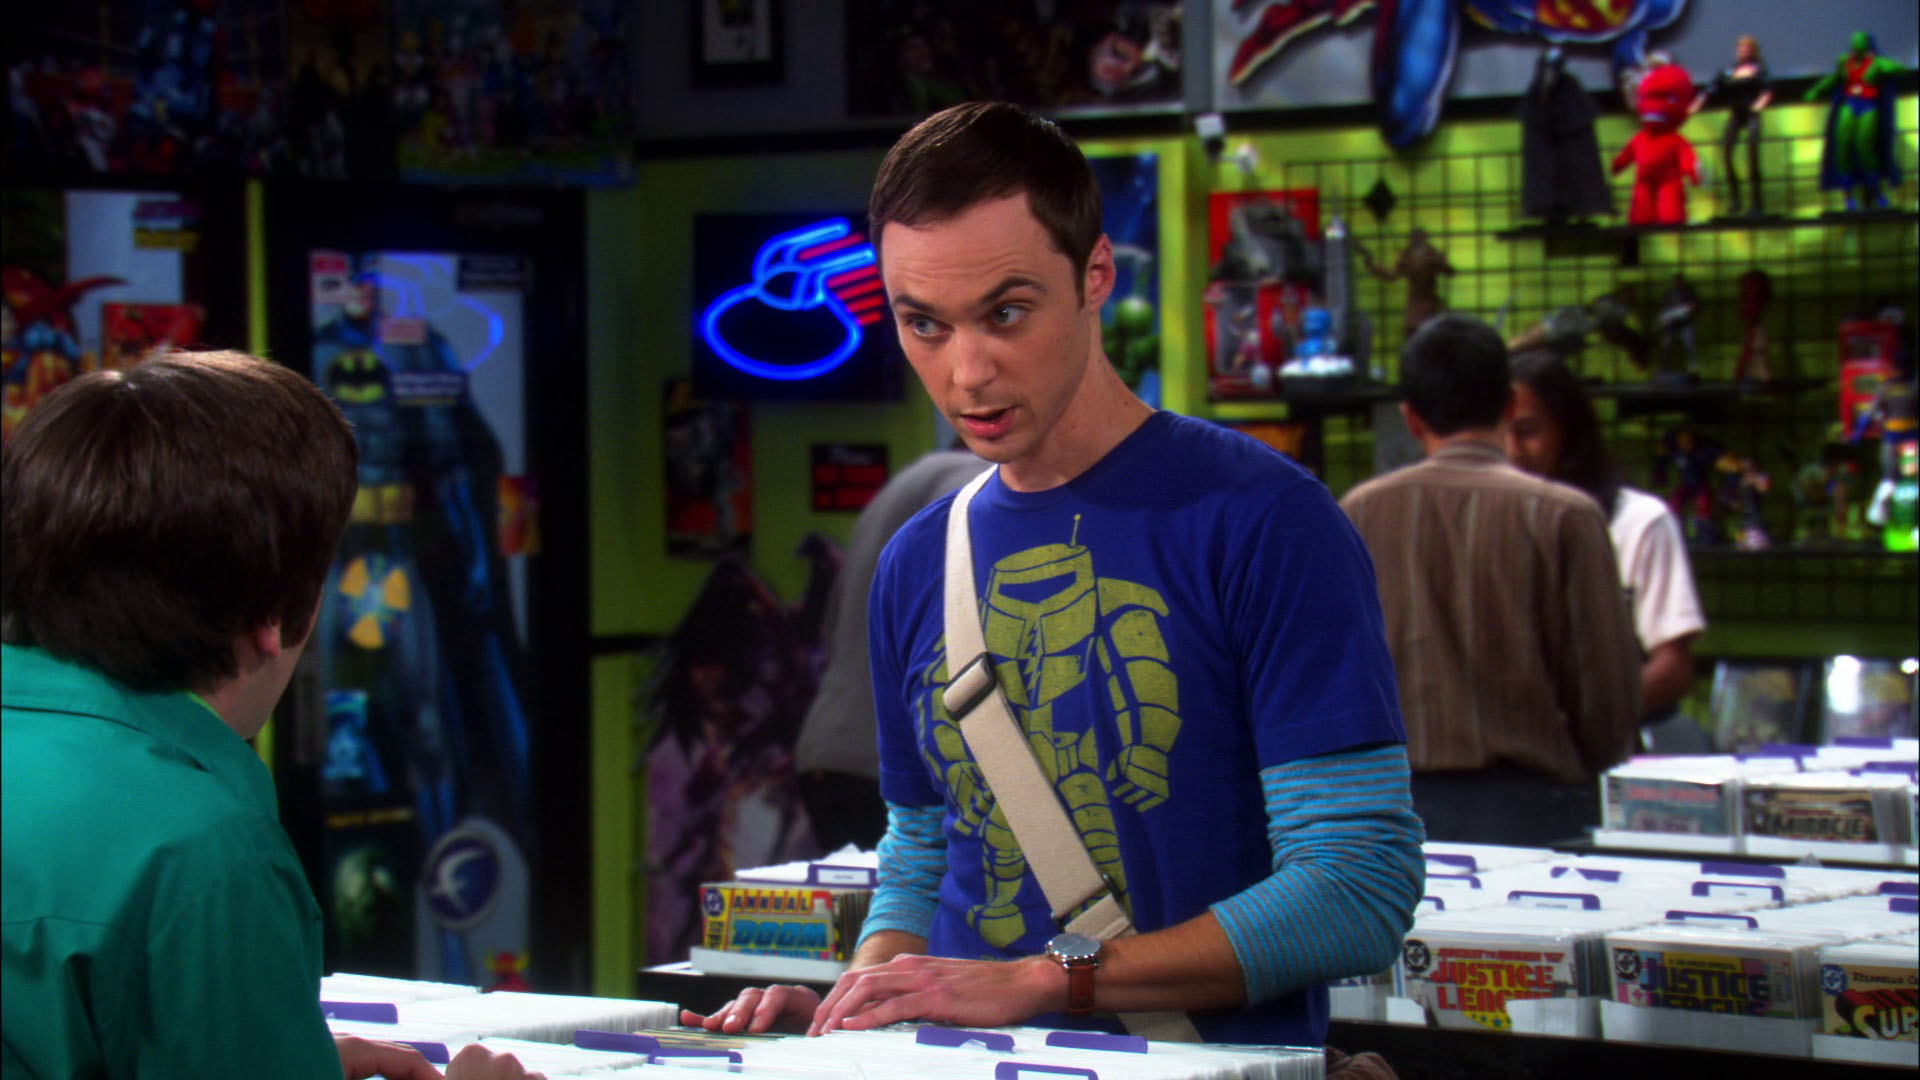 Jim Parsons As Sheldon Cooper At The Comic Book Store / Shop